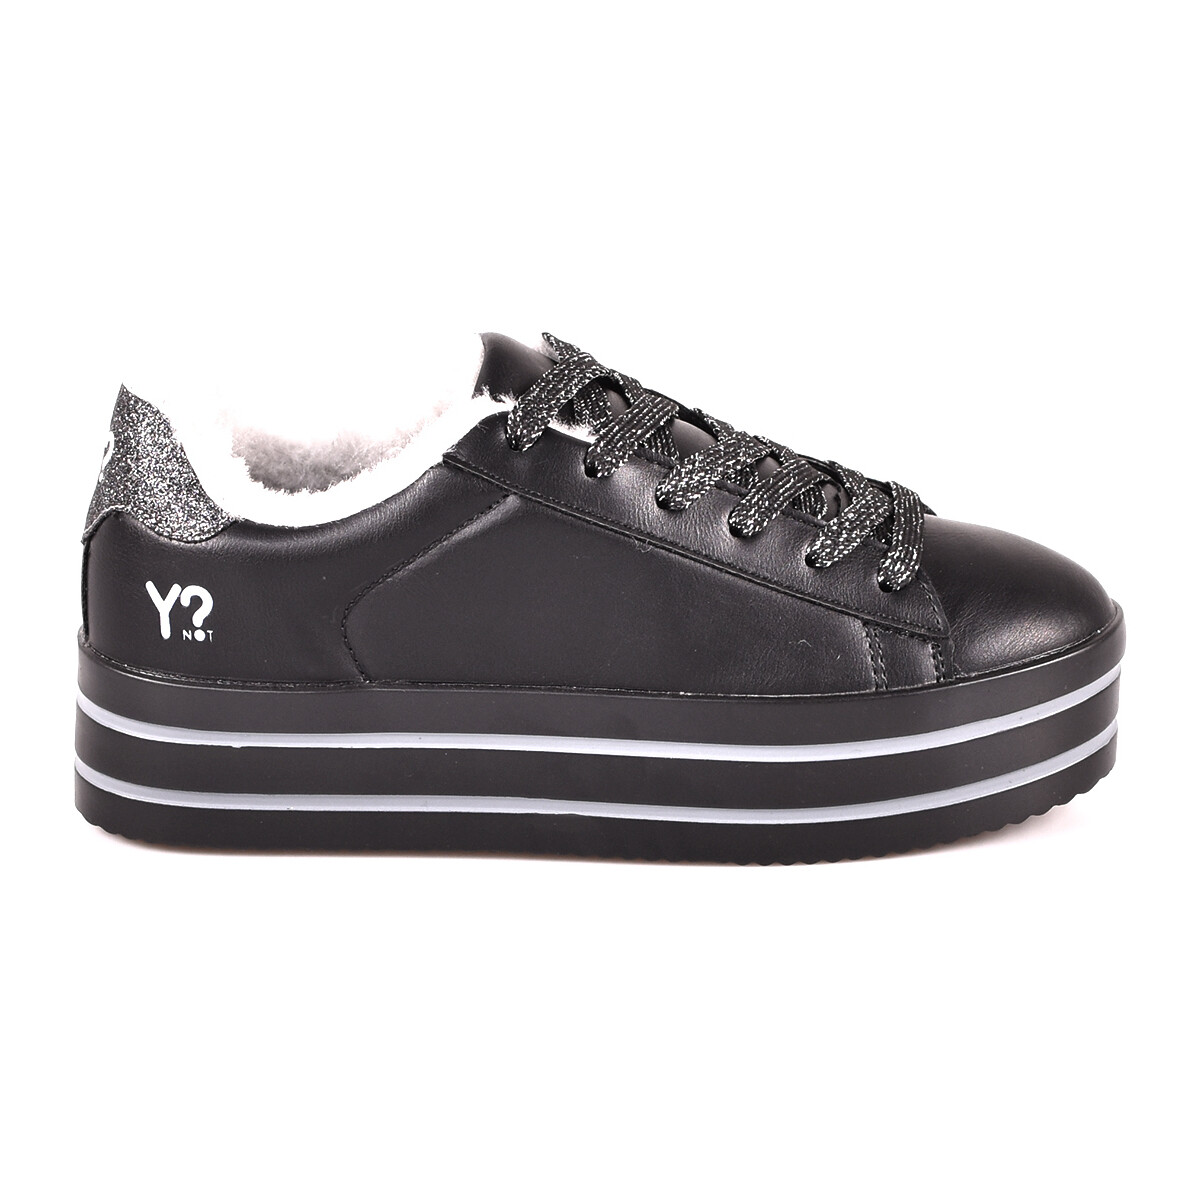 Xαμηλά Sneakers Y Not? W18 52 YW 710